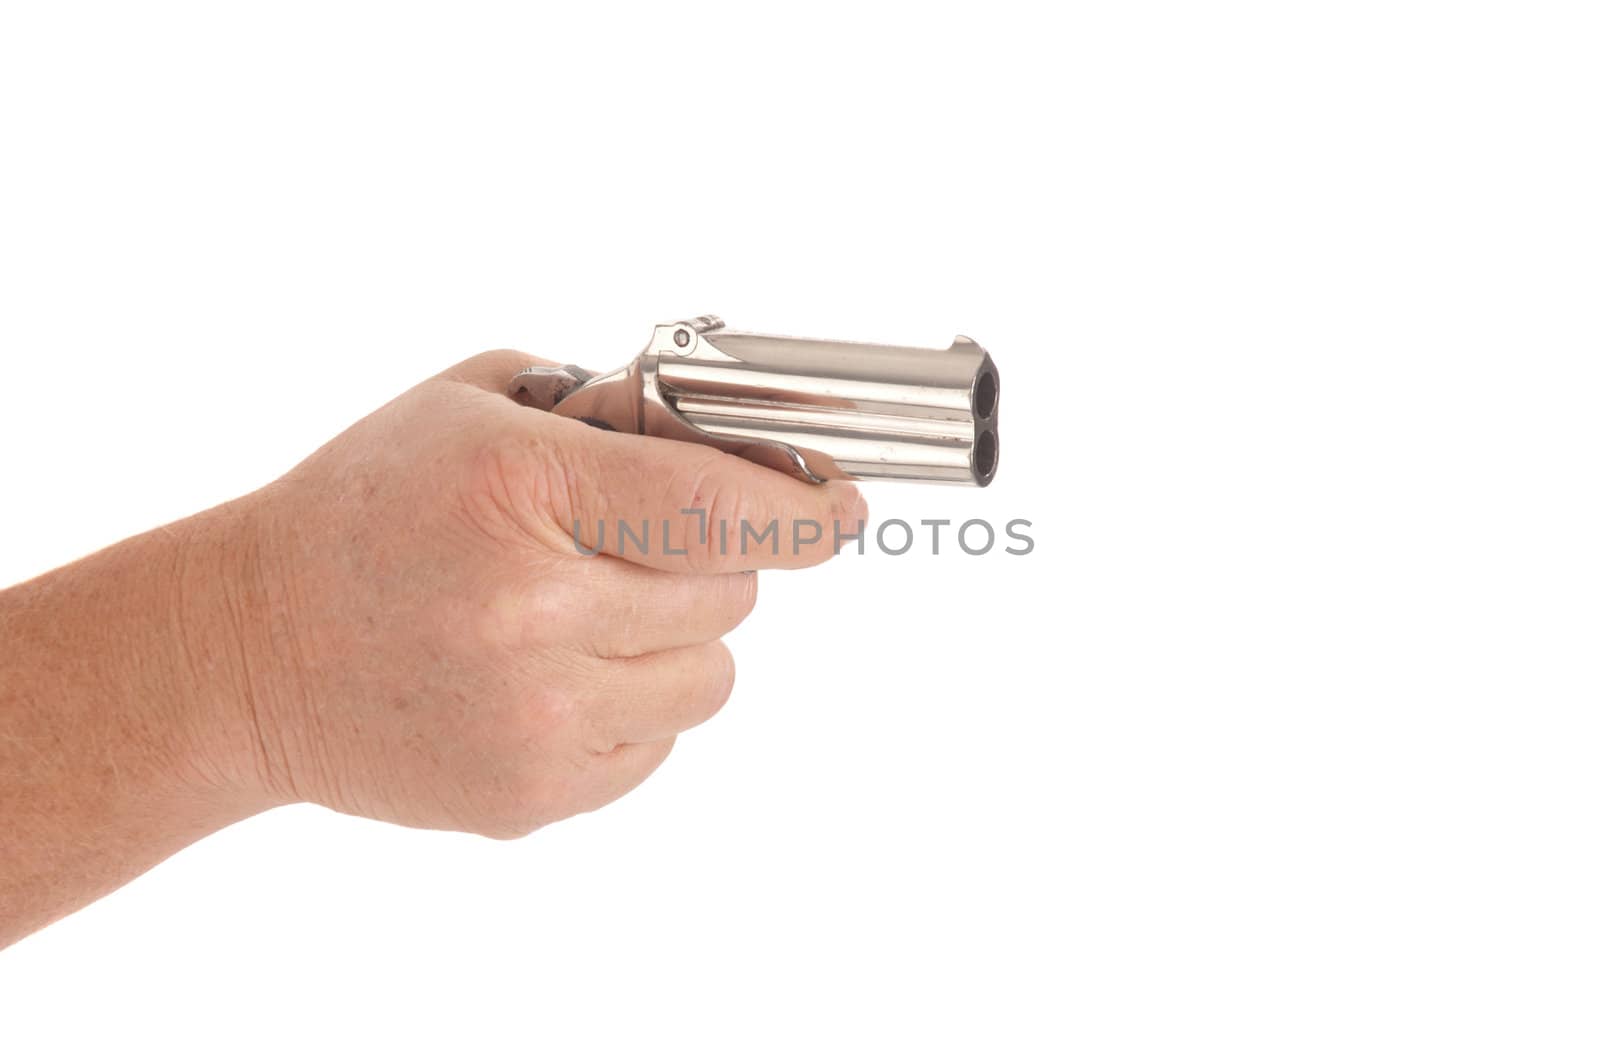 hand holding a double-barreled derringer pistol cocked ready to fire, isolated on white